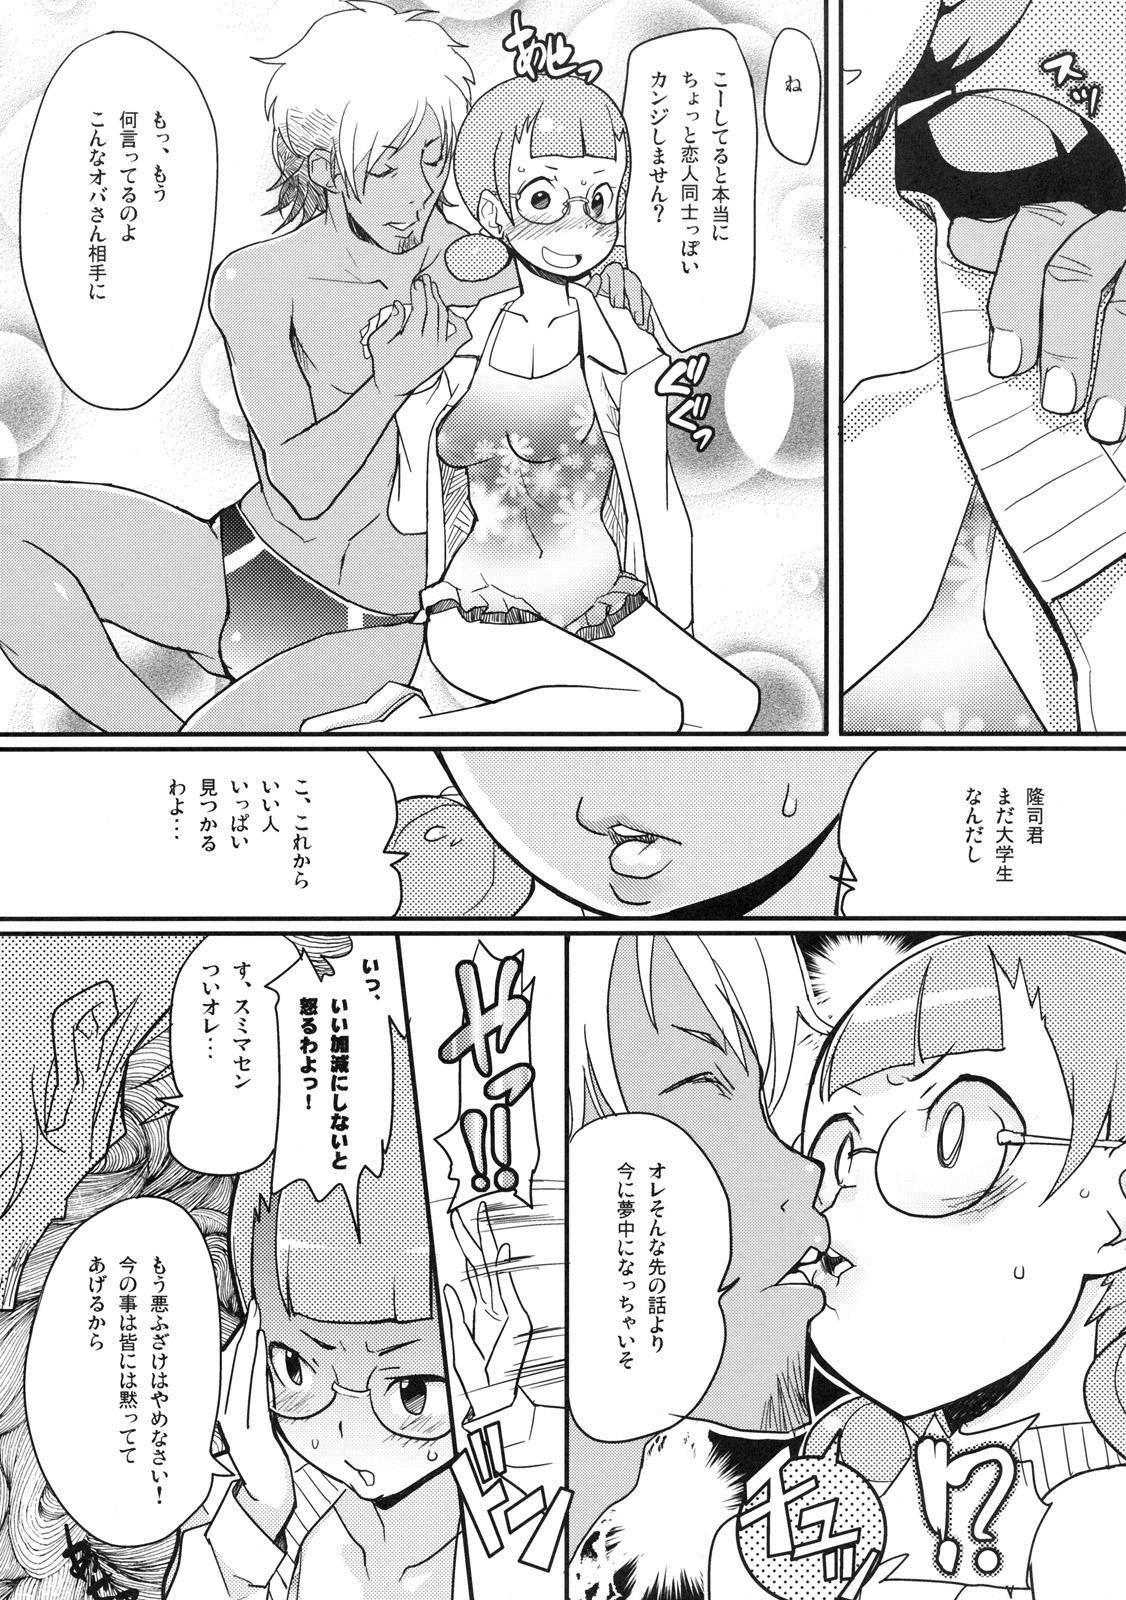 Swing Shinzui EARLY SUMMER ver. Vol. 3 Grosso - Page 8